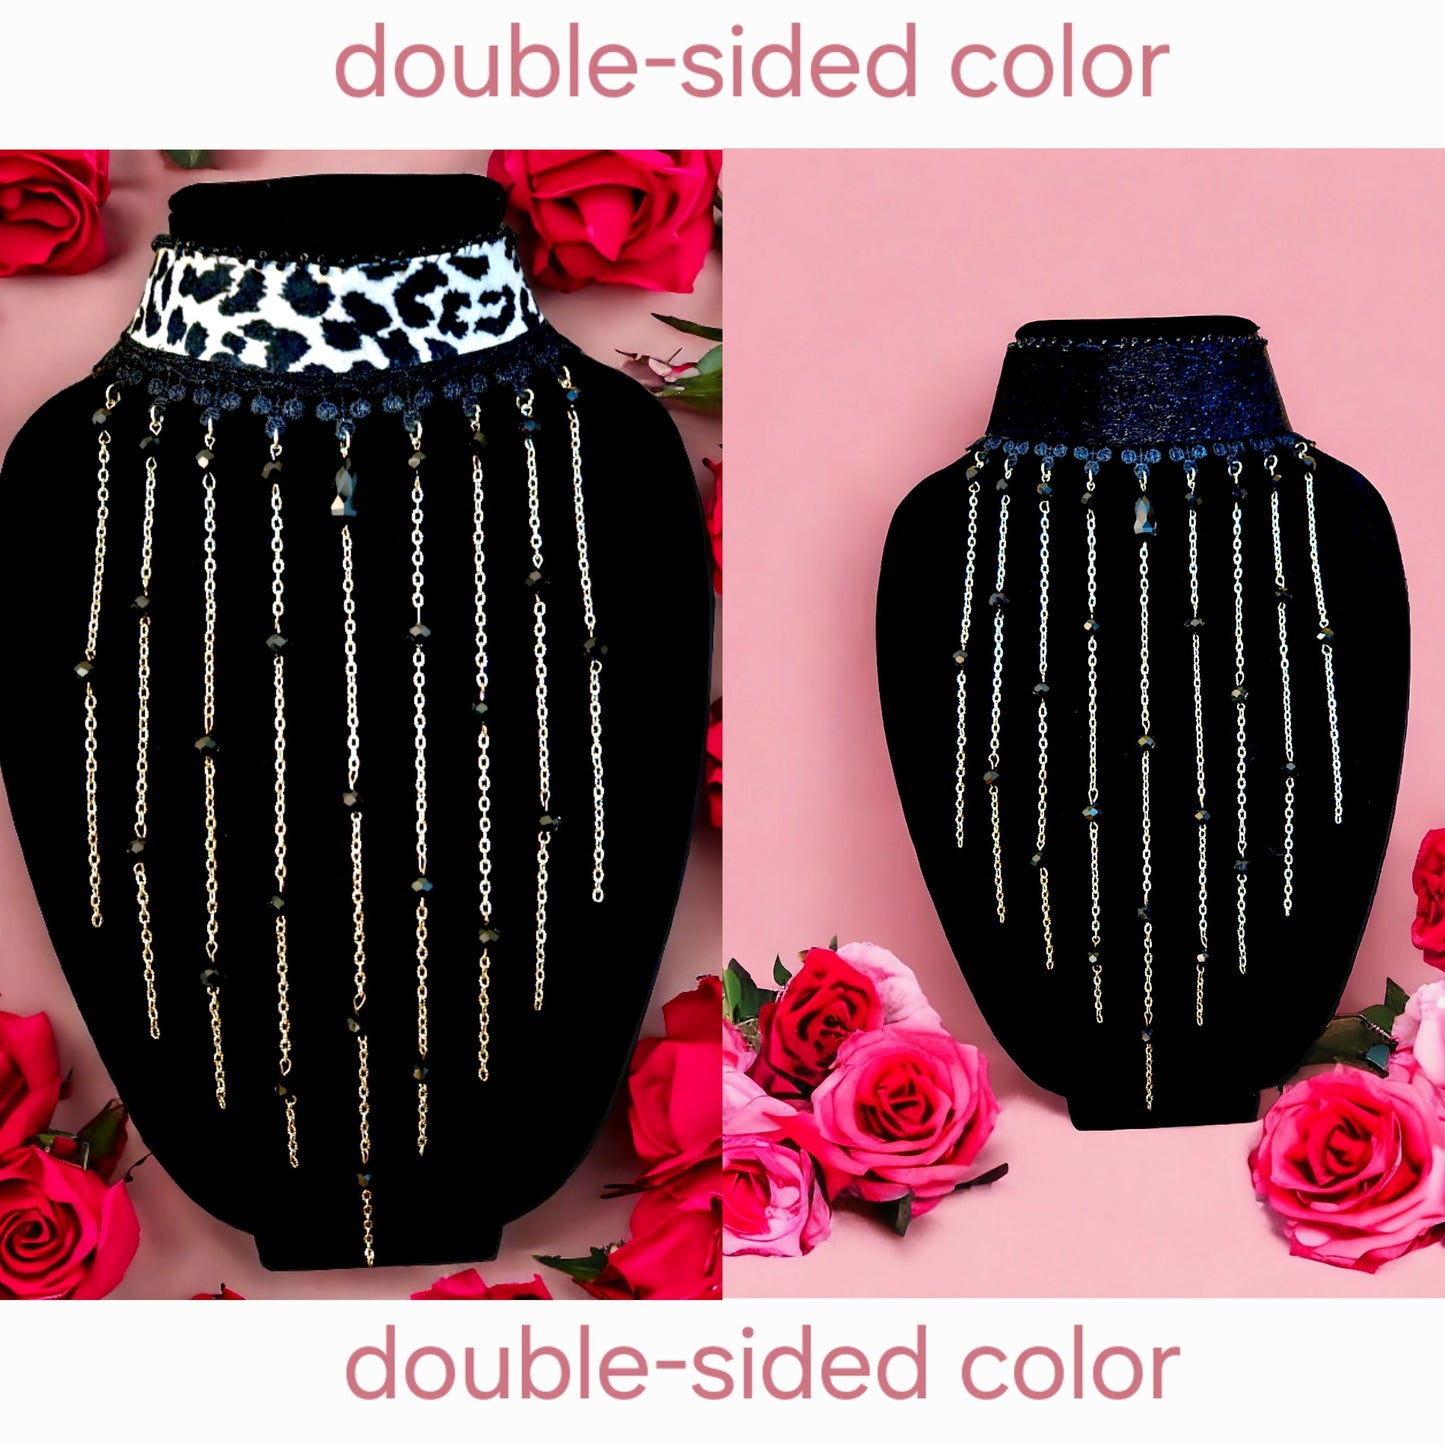 Double-sided color choker necklace